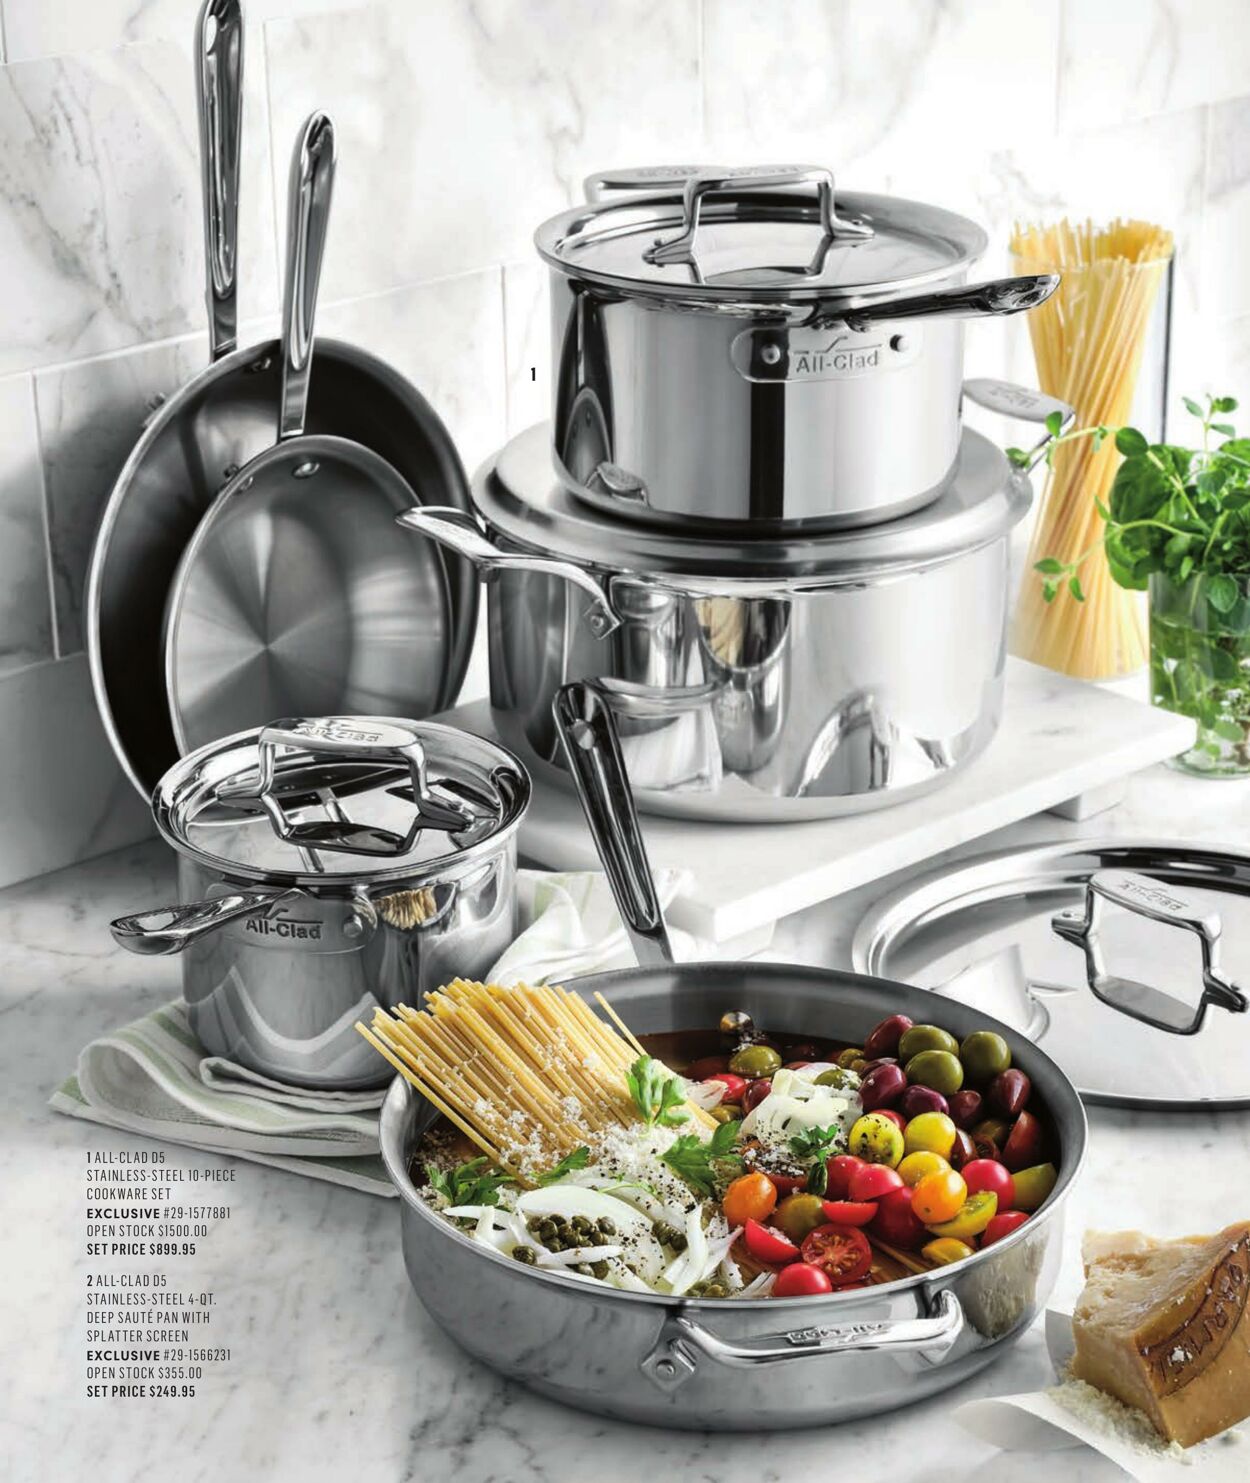 Weekly ad Williams Sonoma 07/01/2022 - 07/31/2022